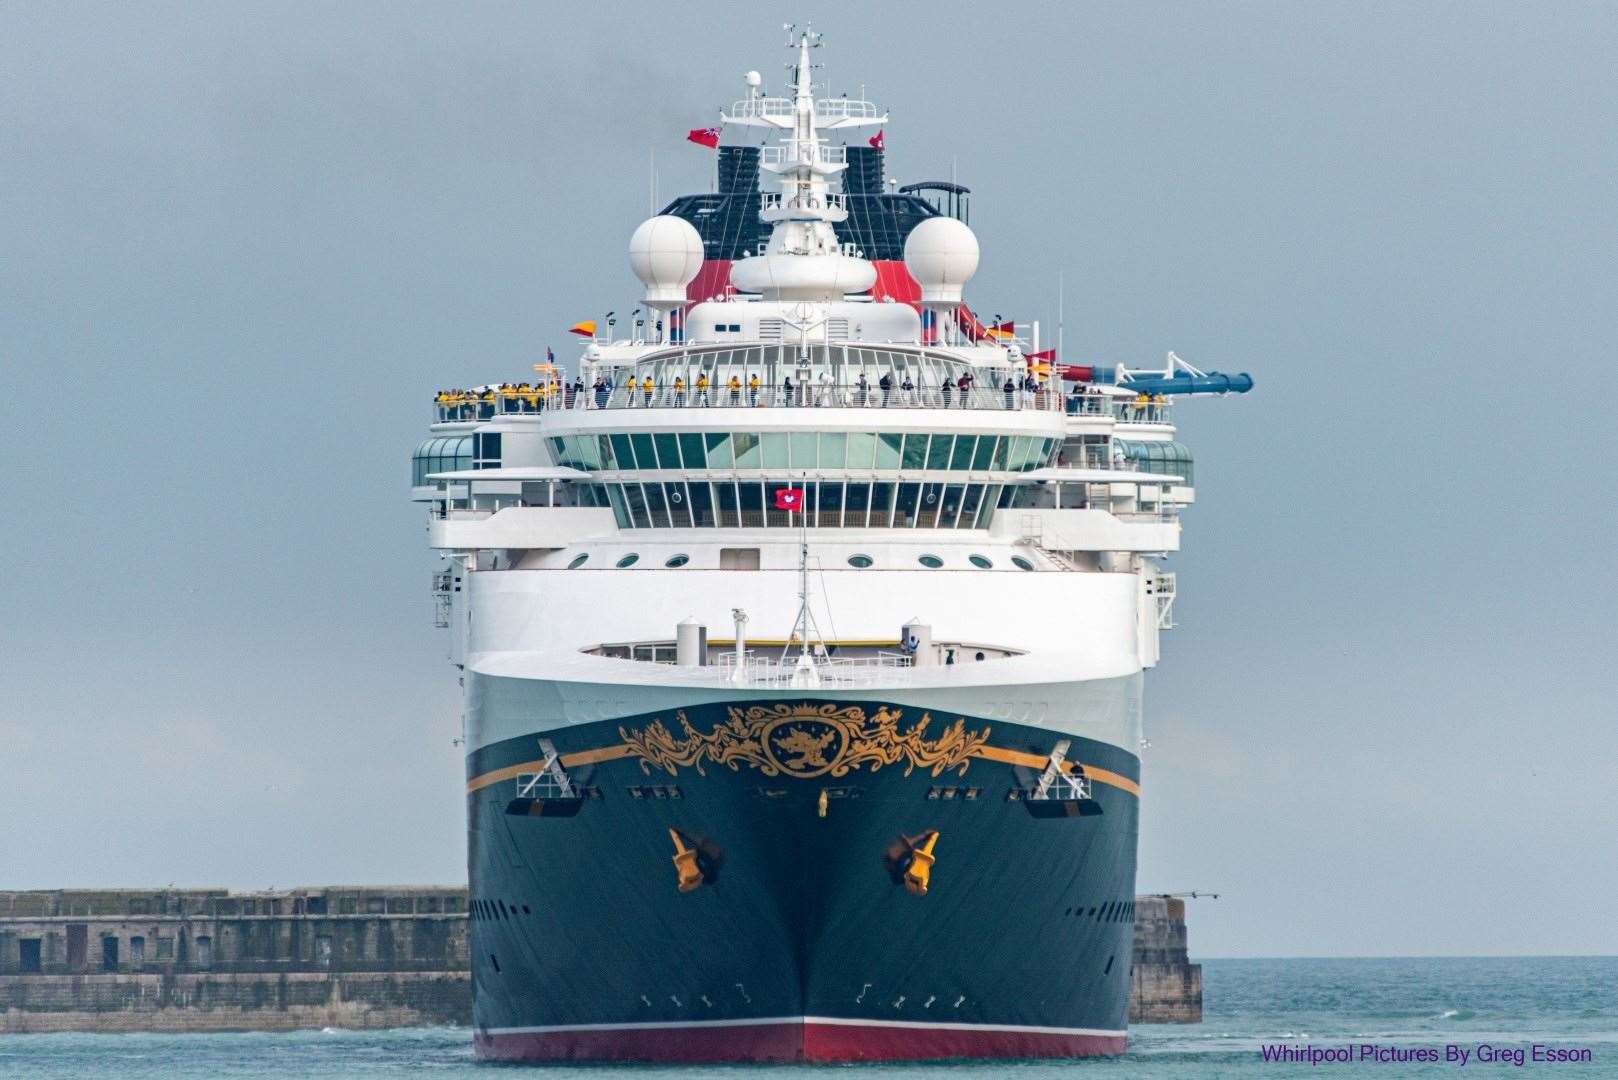 The huge ship is now hosting cruises again. Picture: Greg Esson